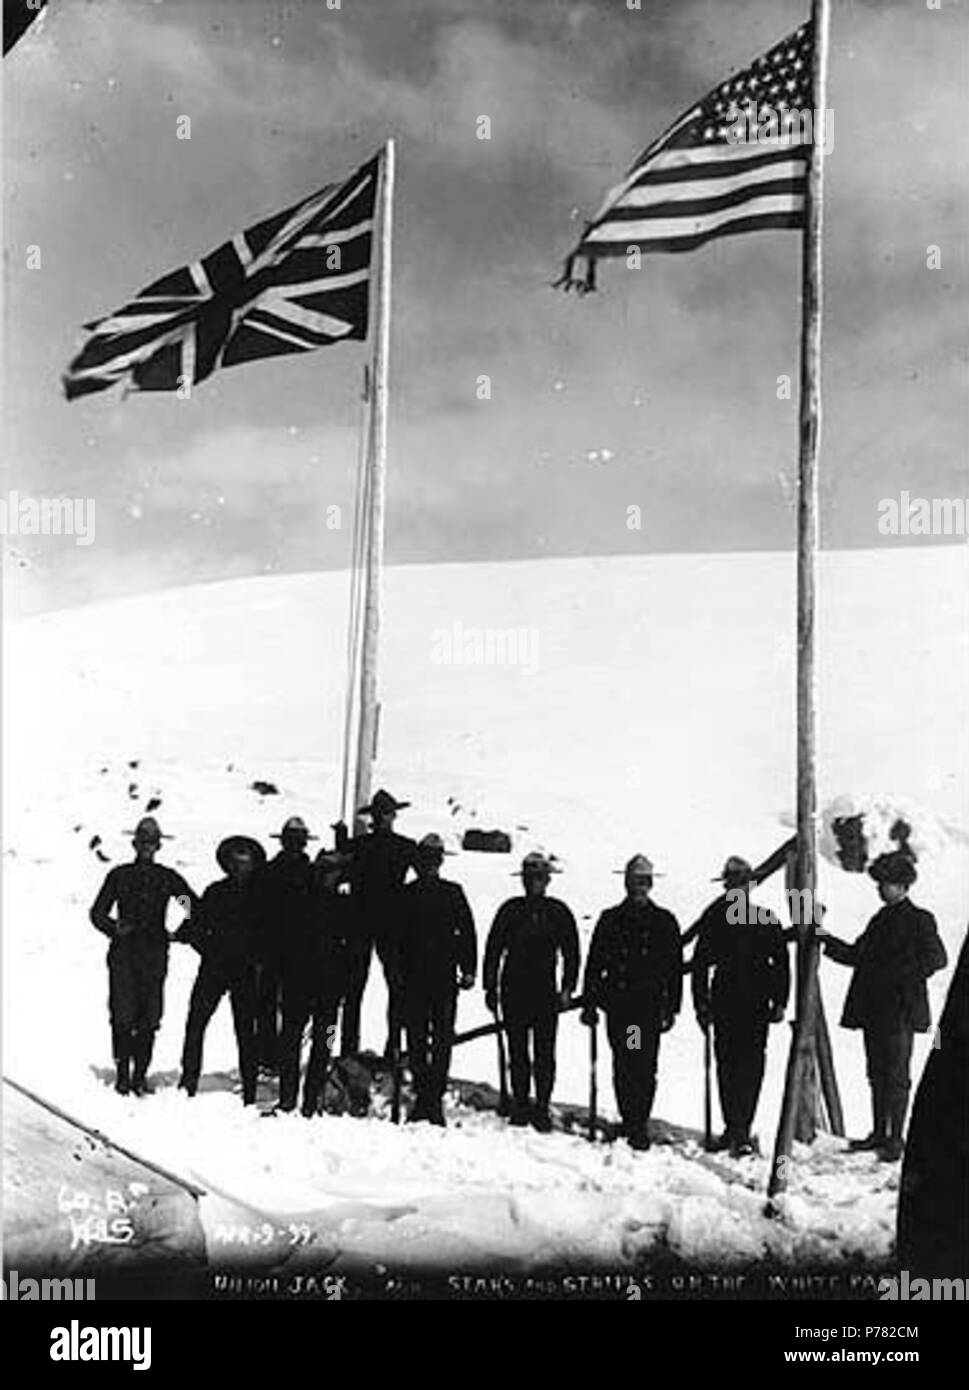 . English: North-West Mounted Police standing next to American and British flags marking the boundary between Alaska and British Columbia, White Pass, April 9, 1899. English: Caption on image: 'Union Jack, and Stars and Stripes on the White Pass Apr 9 '99'' Original photograph by Eric A. Hegg 540; copied by Webster and Stevens 60.A. Subjects (LCTGM): Mounted police; North West Mounted Police (Canada) Subjects (LCSH): Flags--American; Flags--British; Mountain passes  . 9 April 1899 10 North-West Mounted Police standing next to American and British flags marking the boundary between Alaska and B Stock Photo